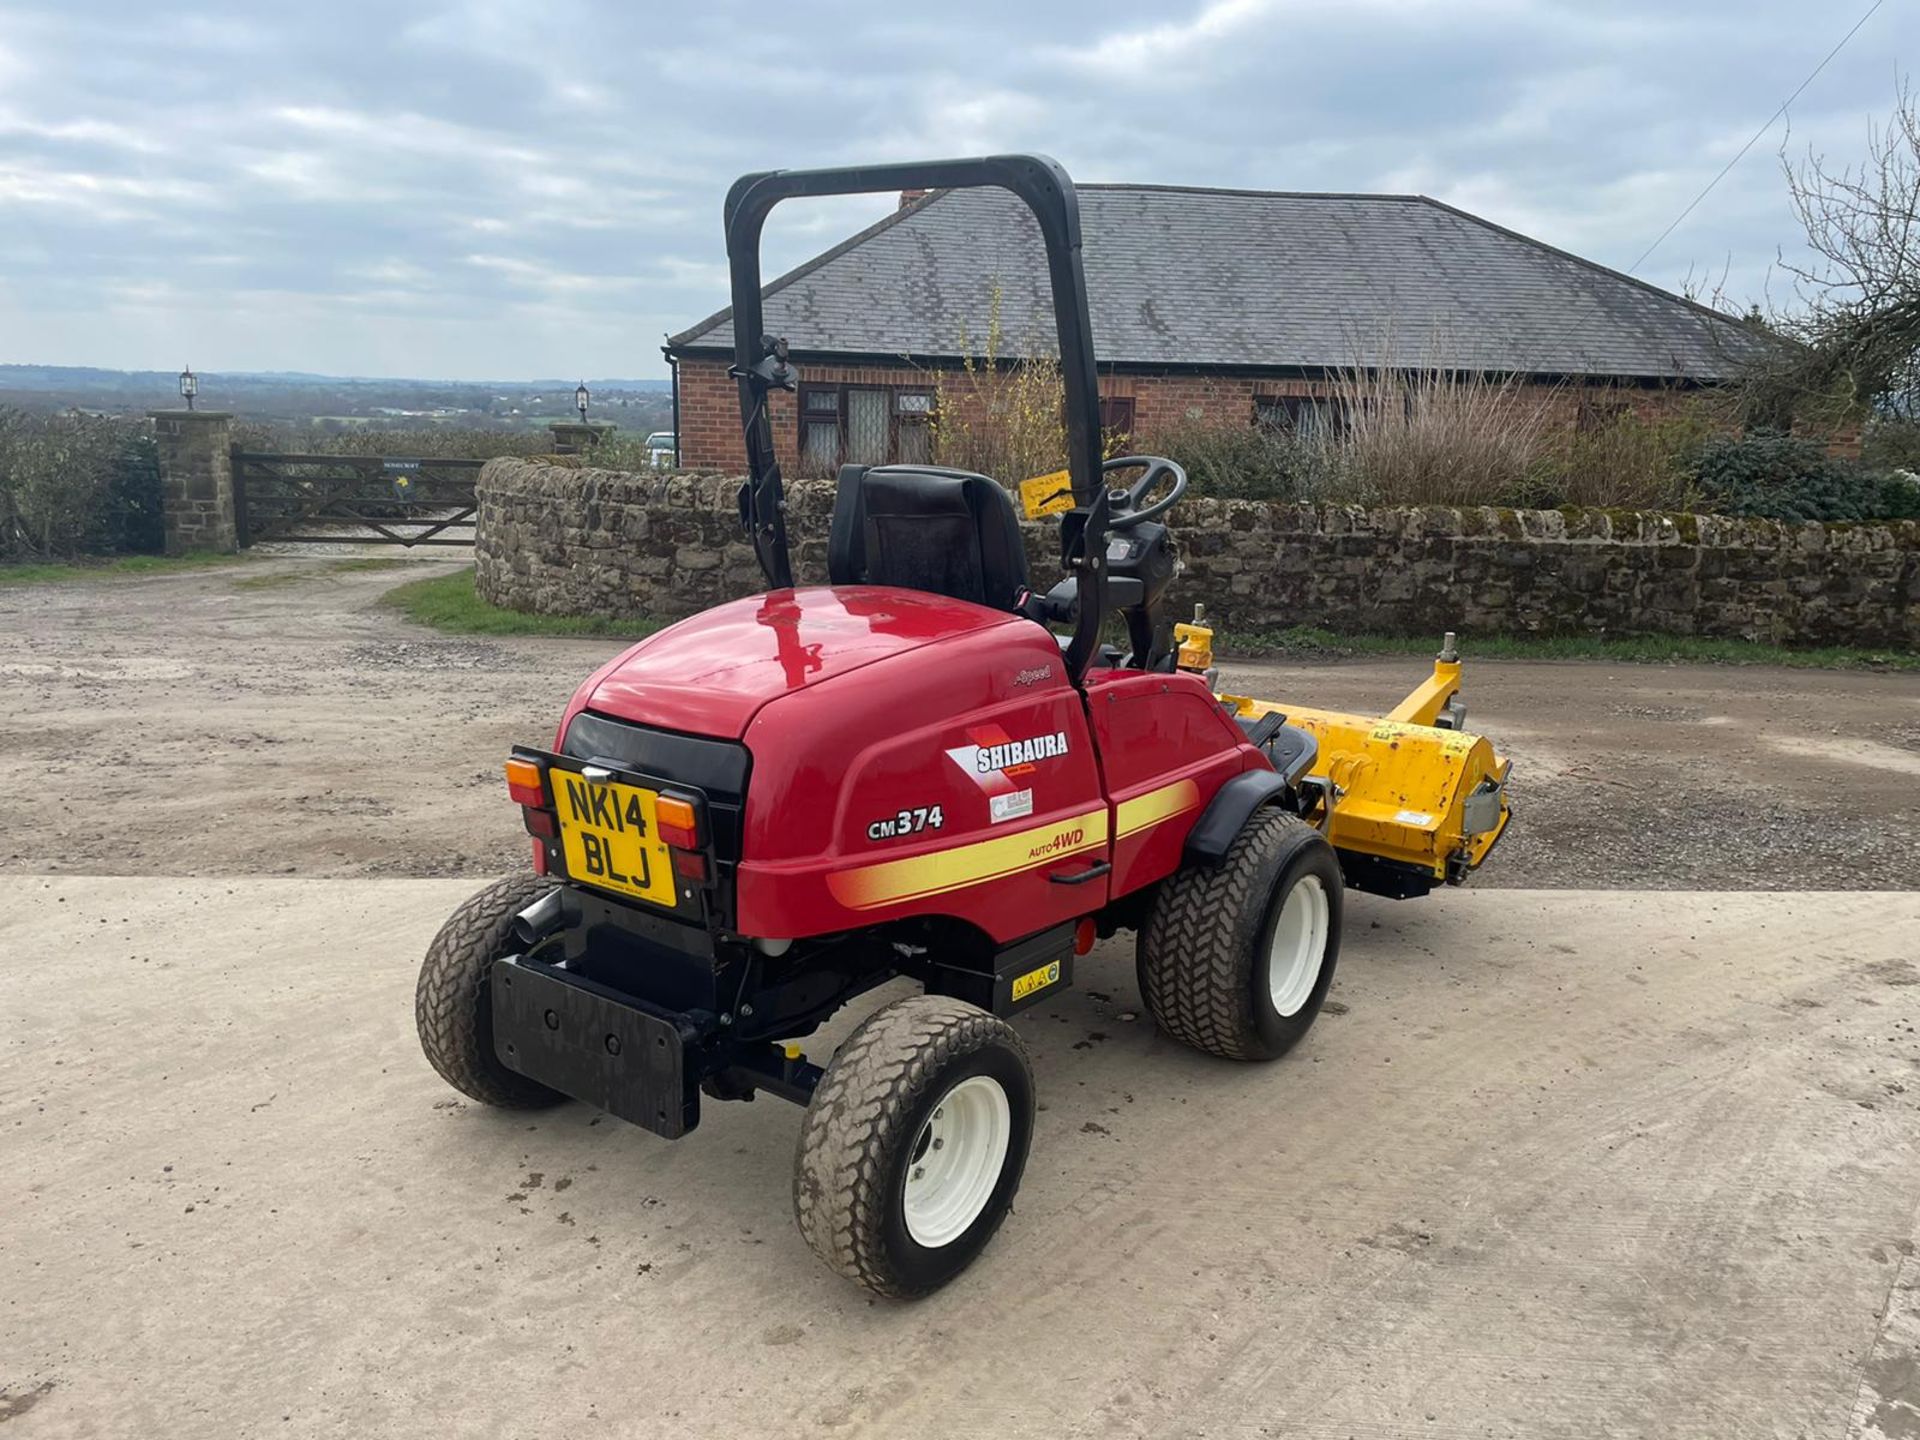 2014 SHIBAURA CM374 RIDE ON MOWER WITH A 2014 MUTHING FLAIL DECK, RUNS DRIVES AND CUTS *PLUS VAT* - Image 5 of 10